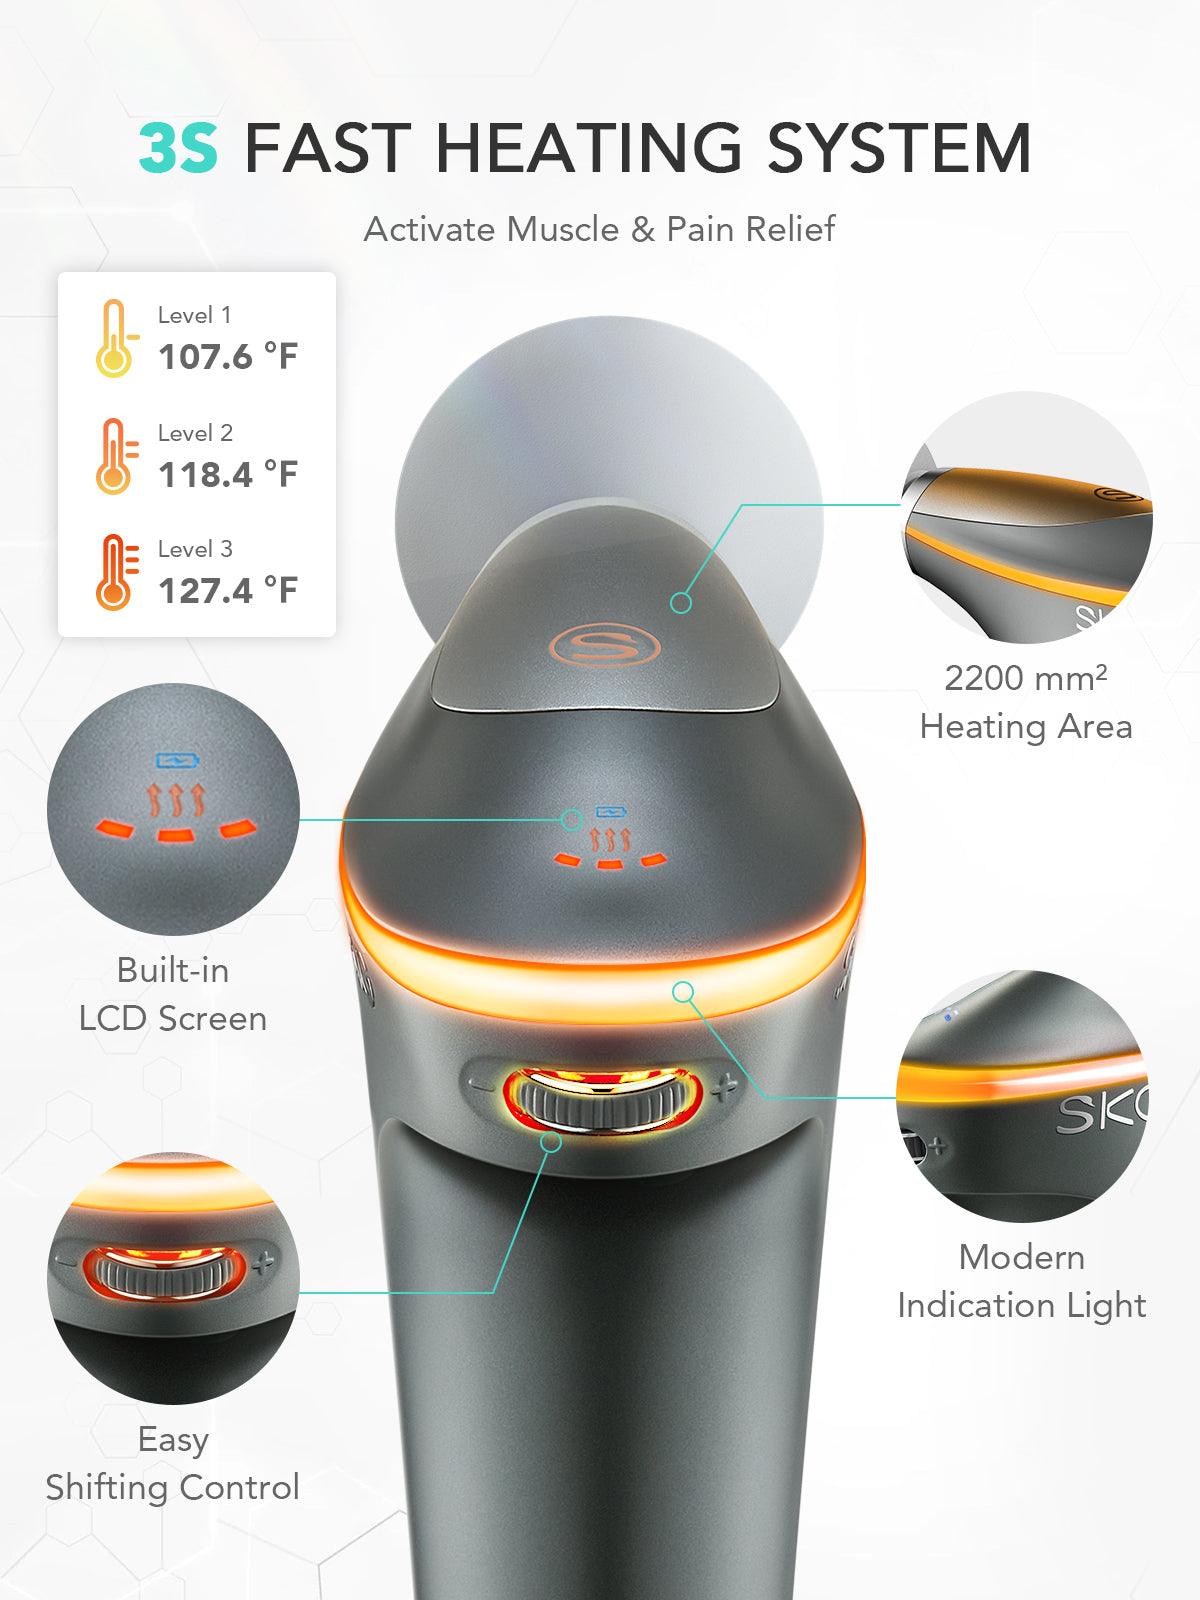 SKG F7 Electric Muscle Massager Percussion Massage Gun for Athletes - SKG